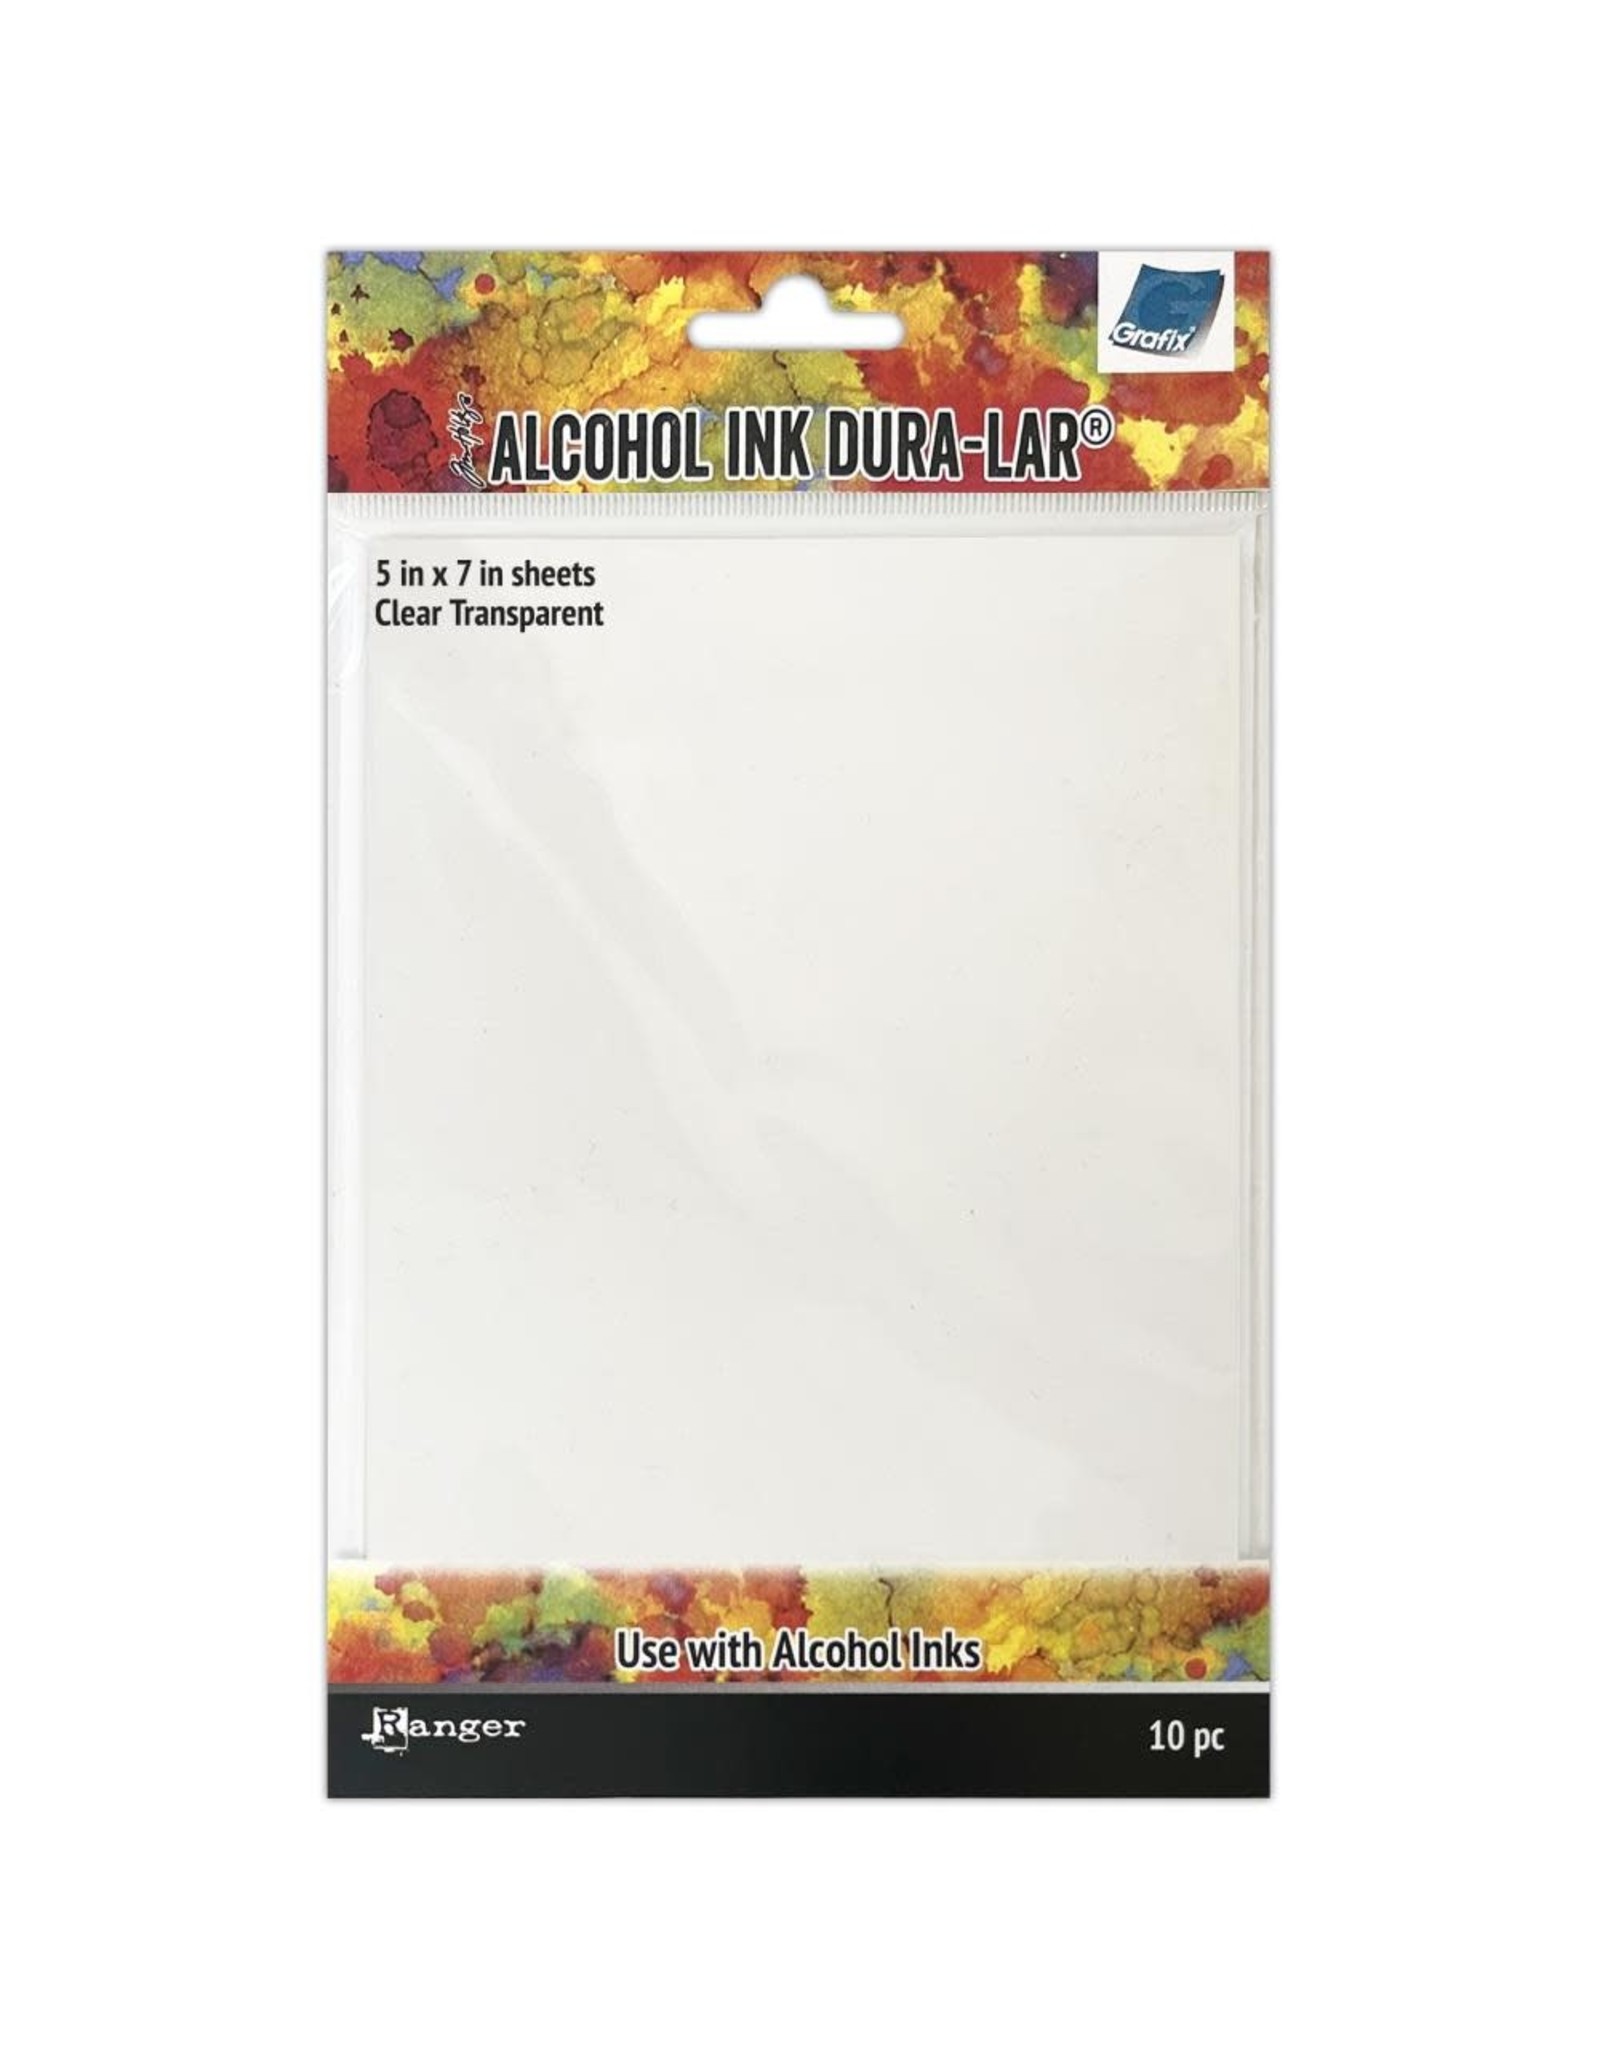 RANGER TIM HOLTZ ALCOHOL INK DURA-LAR CLEAR TRANSPARENT 5x7 SYNTHETIC SHEETS